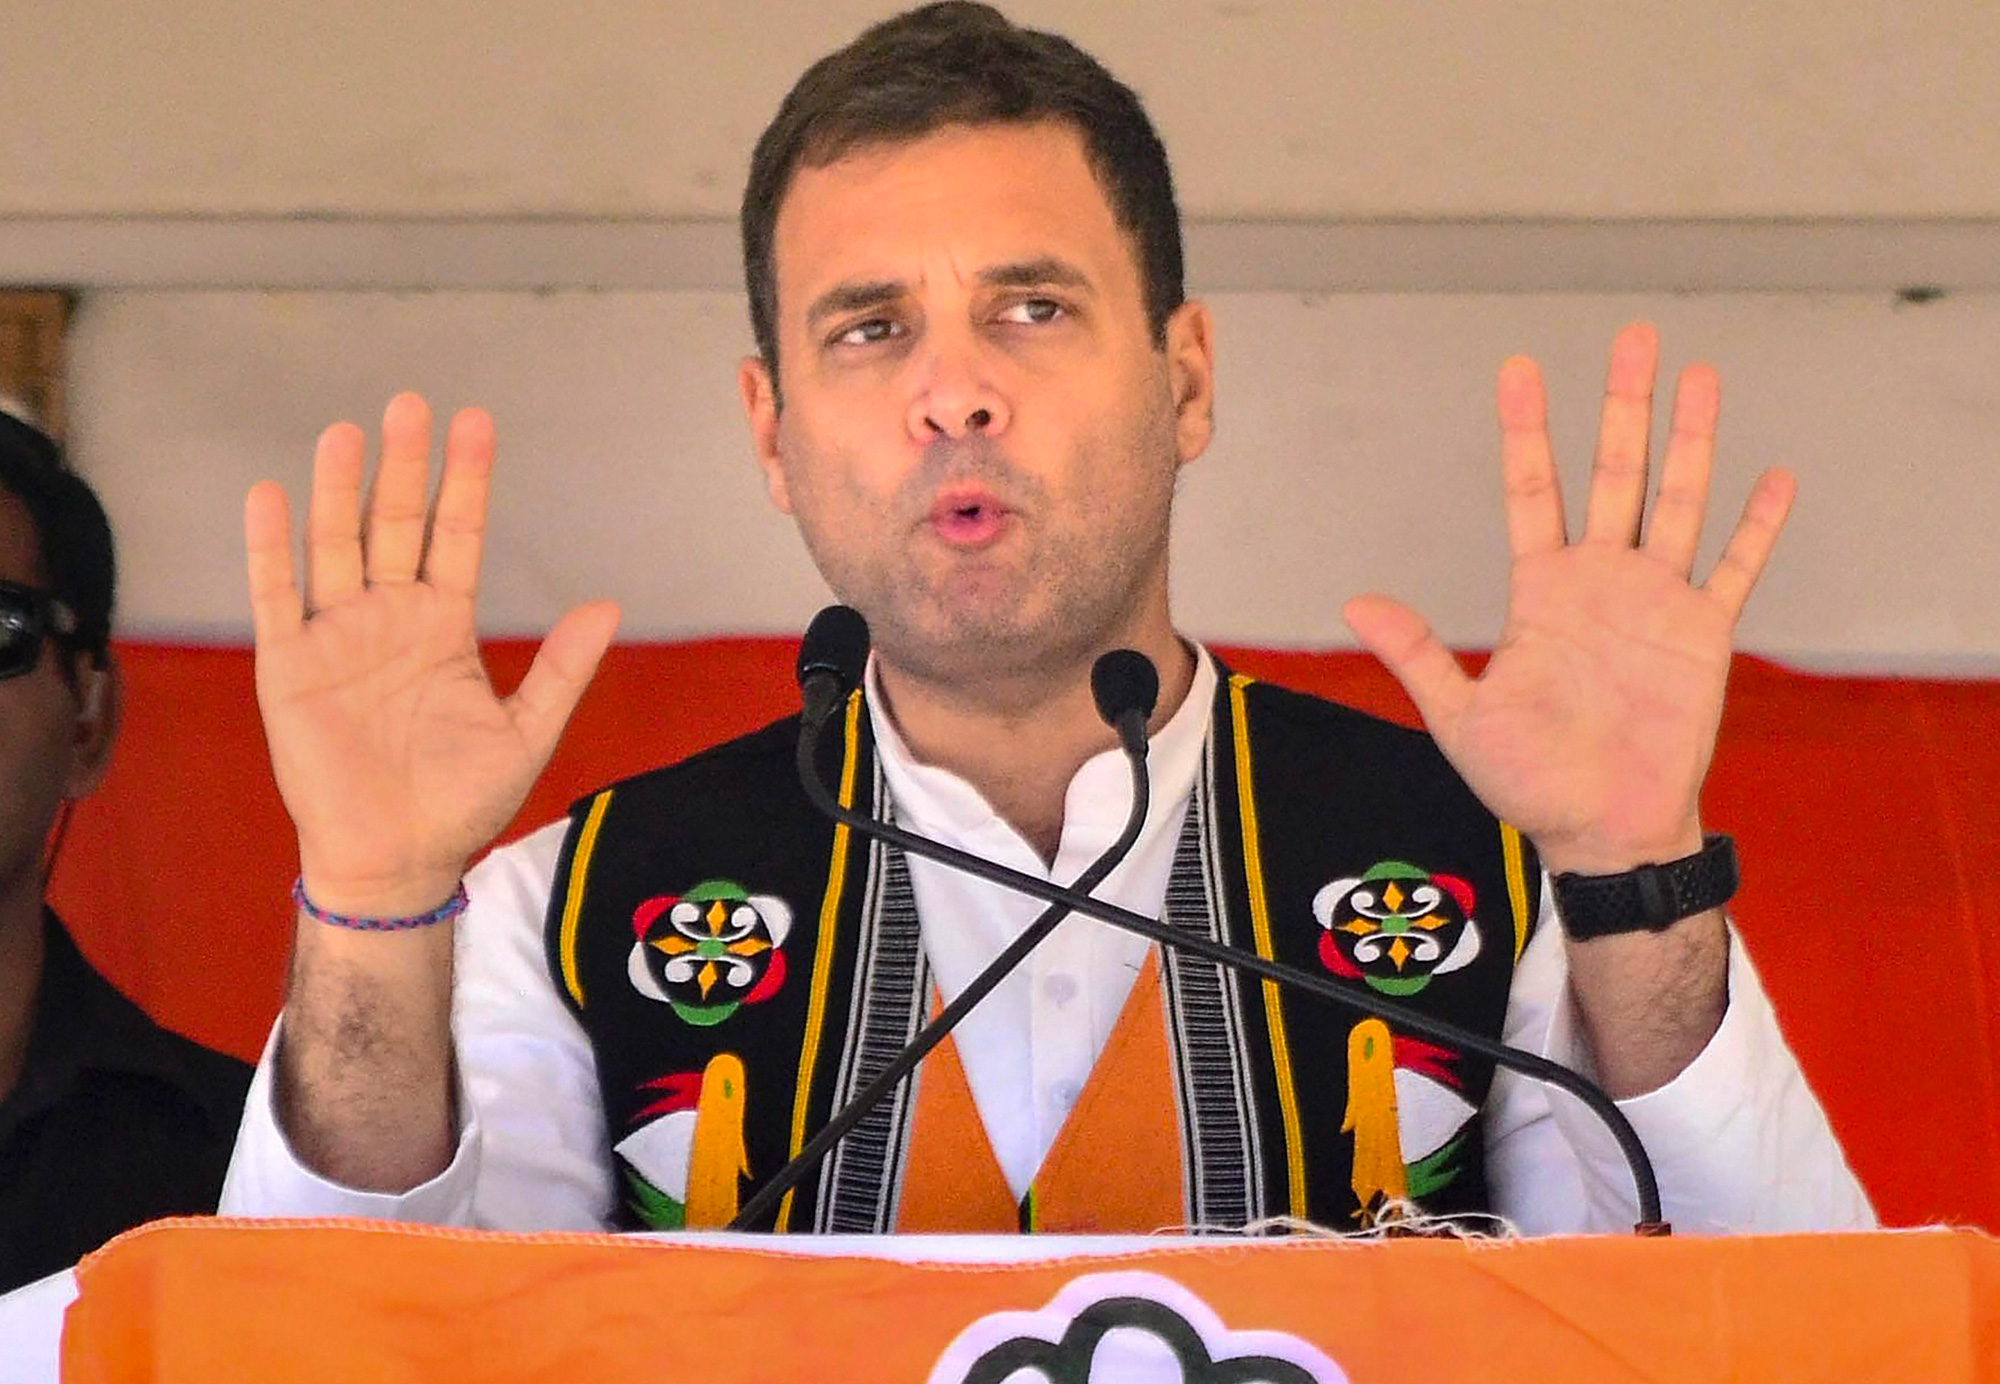 A casual perusal of social media will bear testimony to the fact that what began in 2013-14 as anxiety over the possible victory of Modi has now evolved into hesitant support for the Congress led by Rahul Gandhi